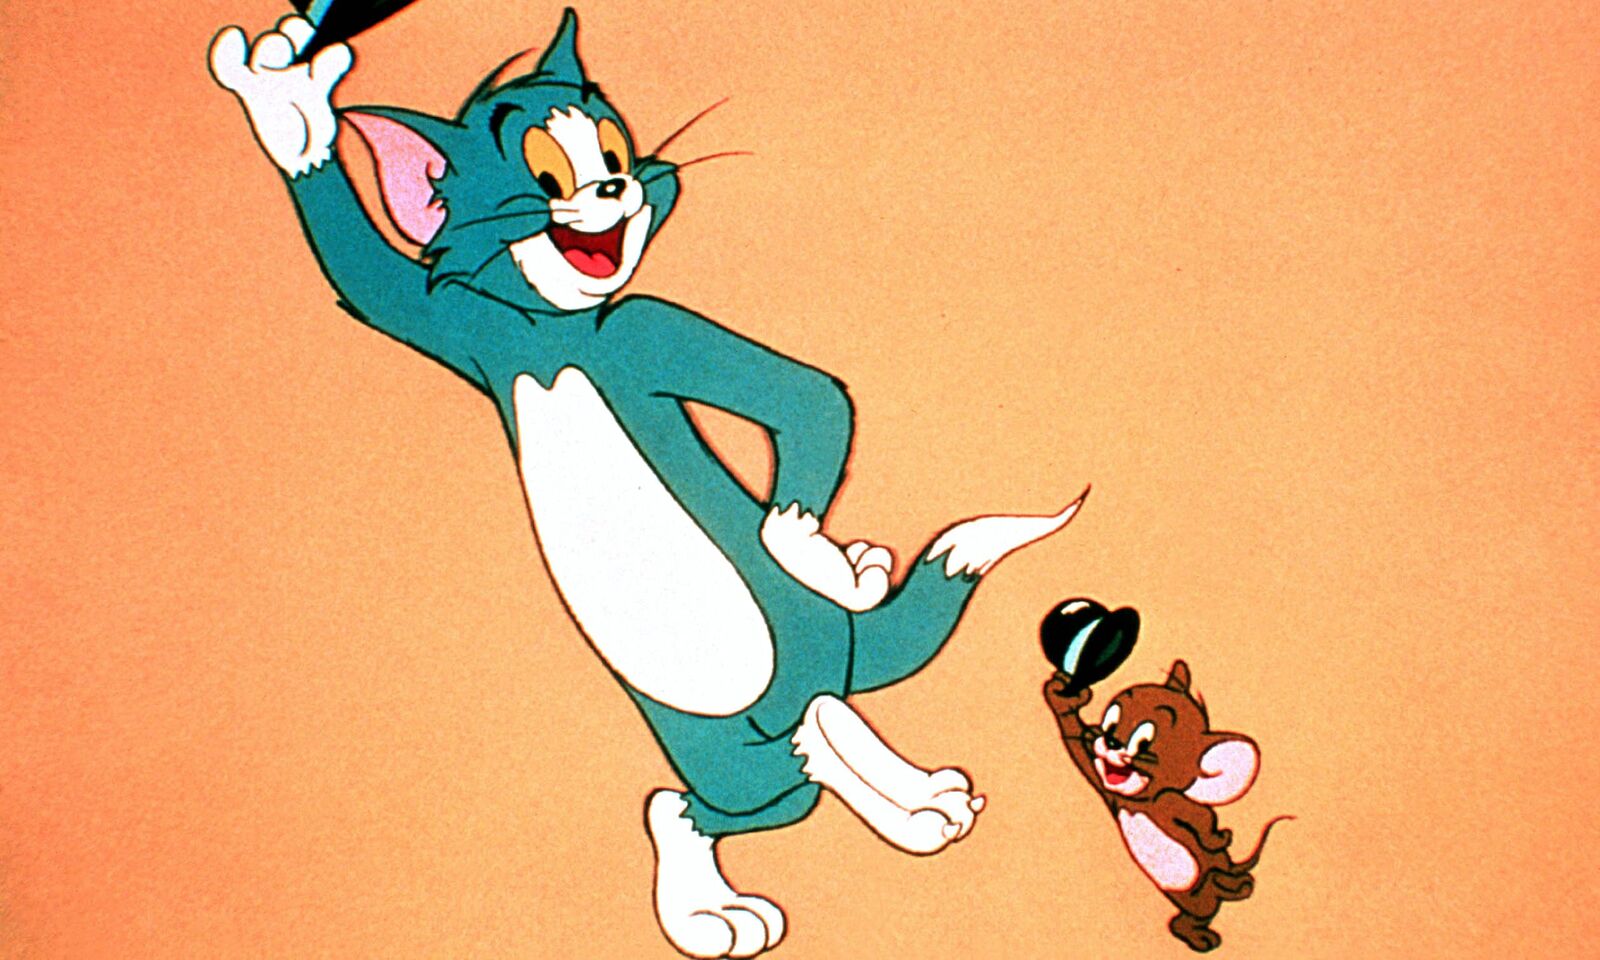 Tom-And-Jerry-Funny.jpg